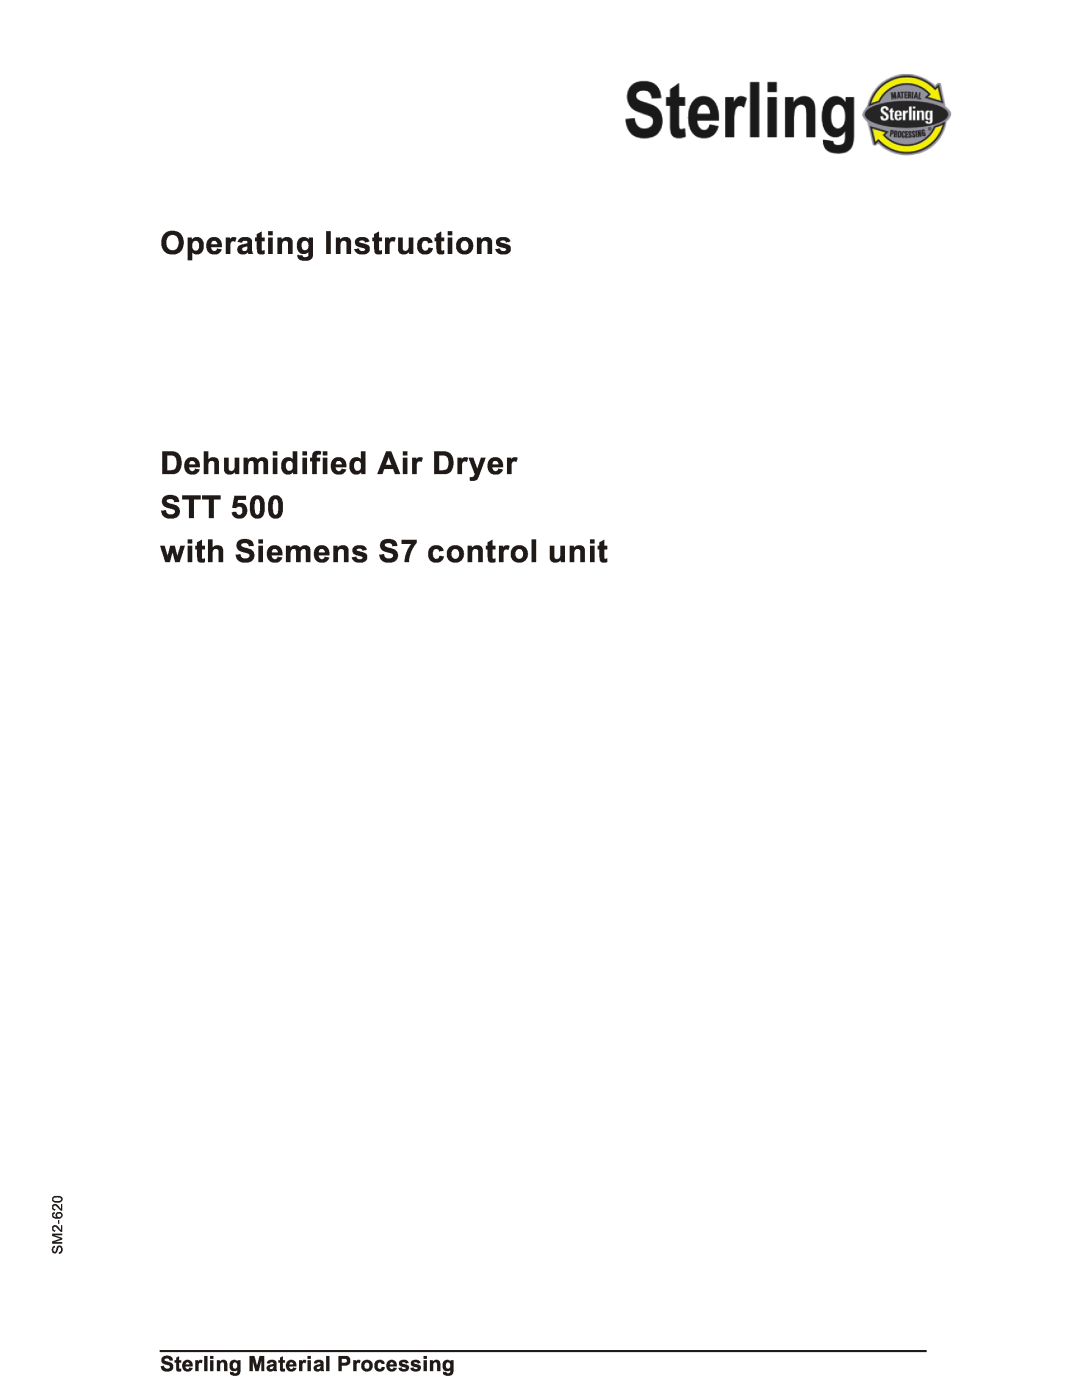 Sterling STT 500 manual Operating Instructions Dehumidified Air Dryer STT, with Siemens S7 control unit, SM2-620 